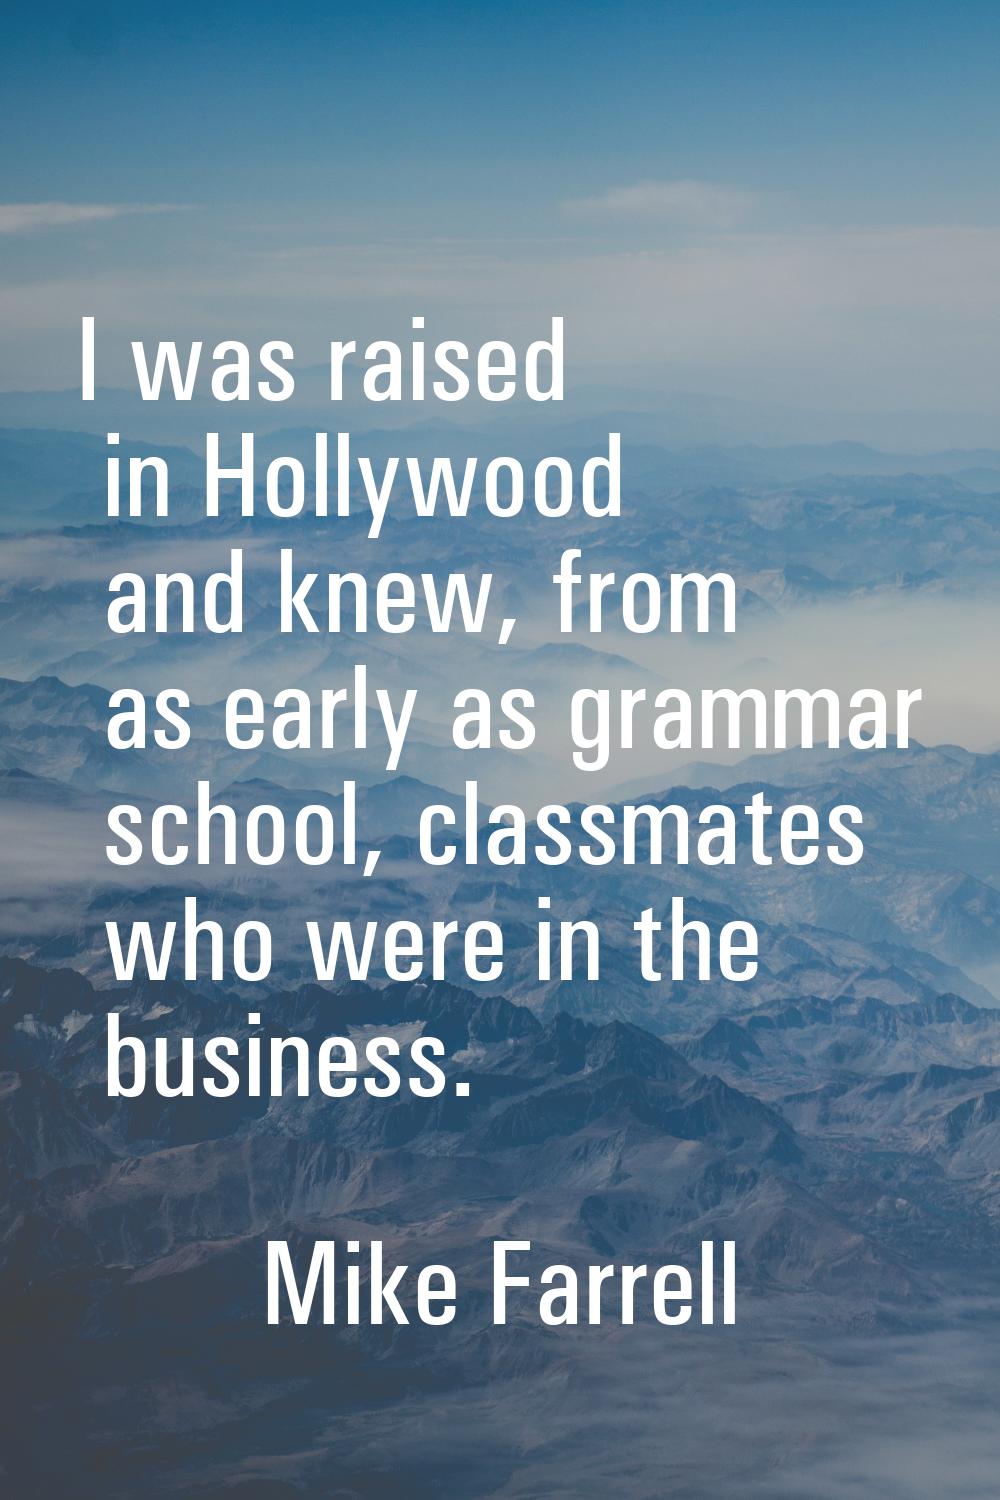 I was raised in Hollywood and knew, from as early as grammar school, classmates who were in the bus